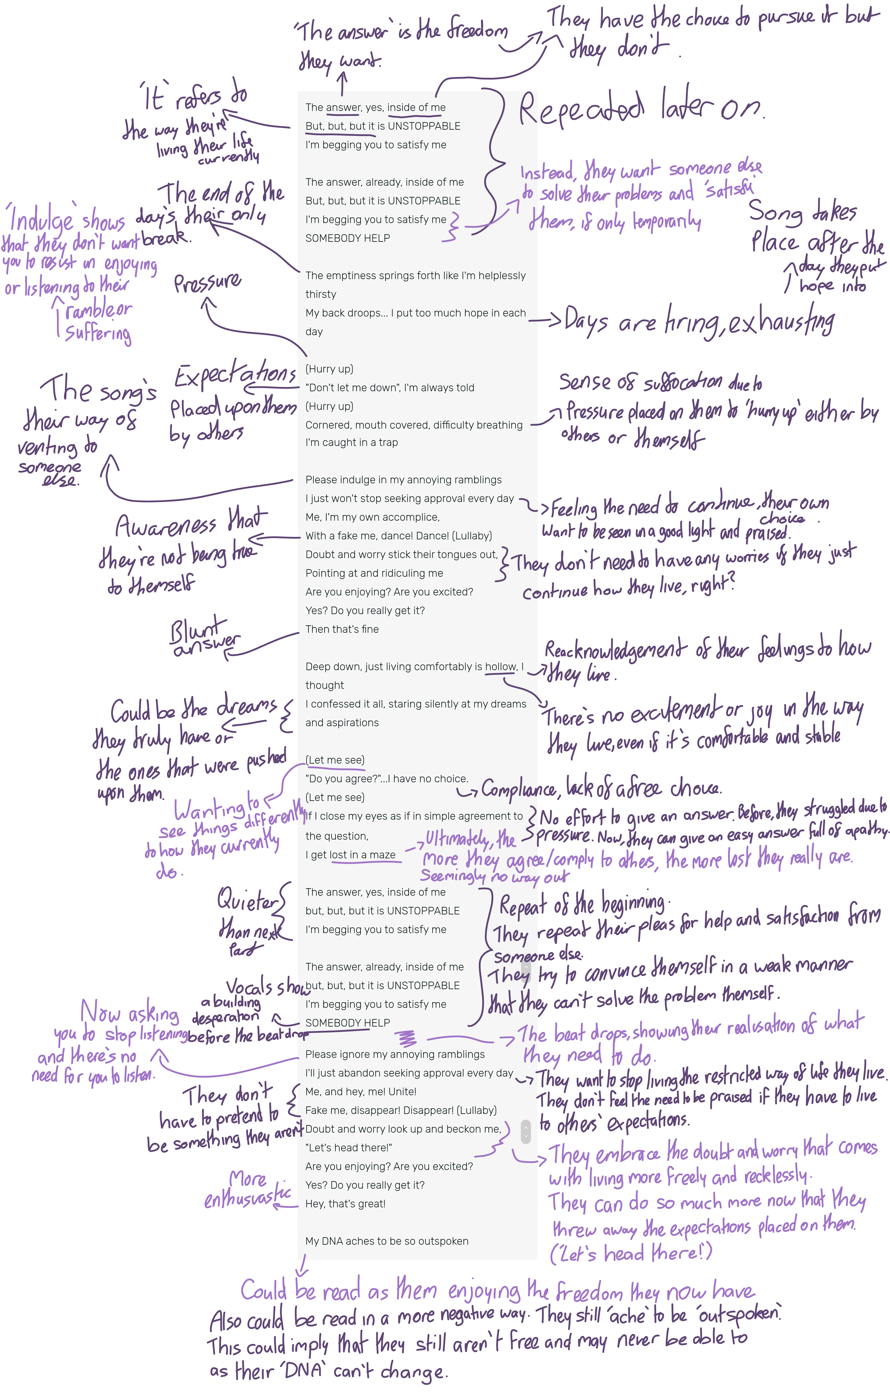     OH BOY HERE'S MY ANNOTATION OF UNSTOPPABLE!

I didn't want to make a big post so, I just...